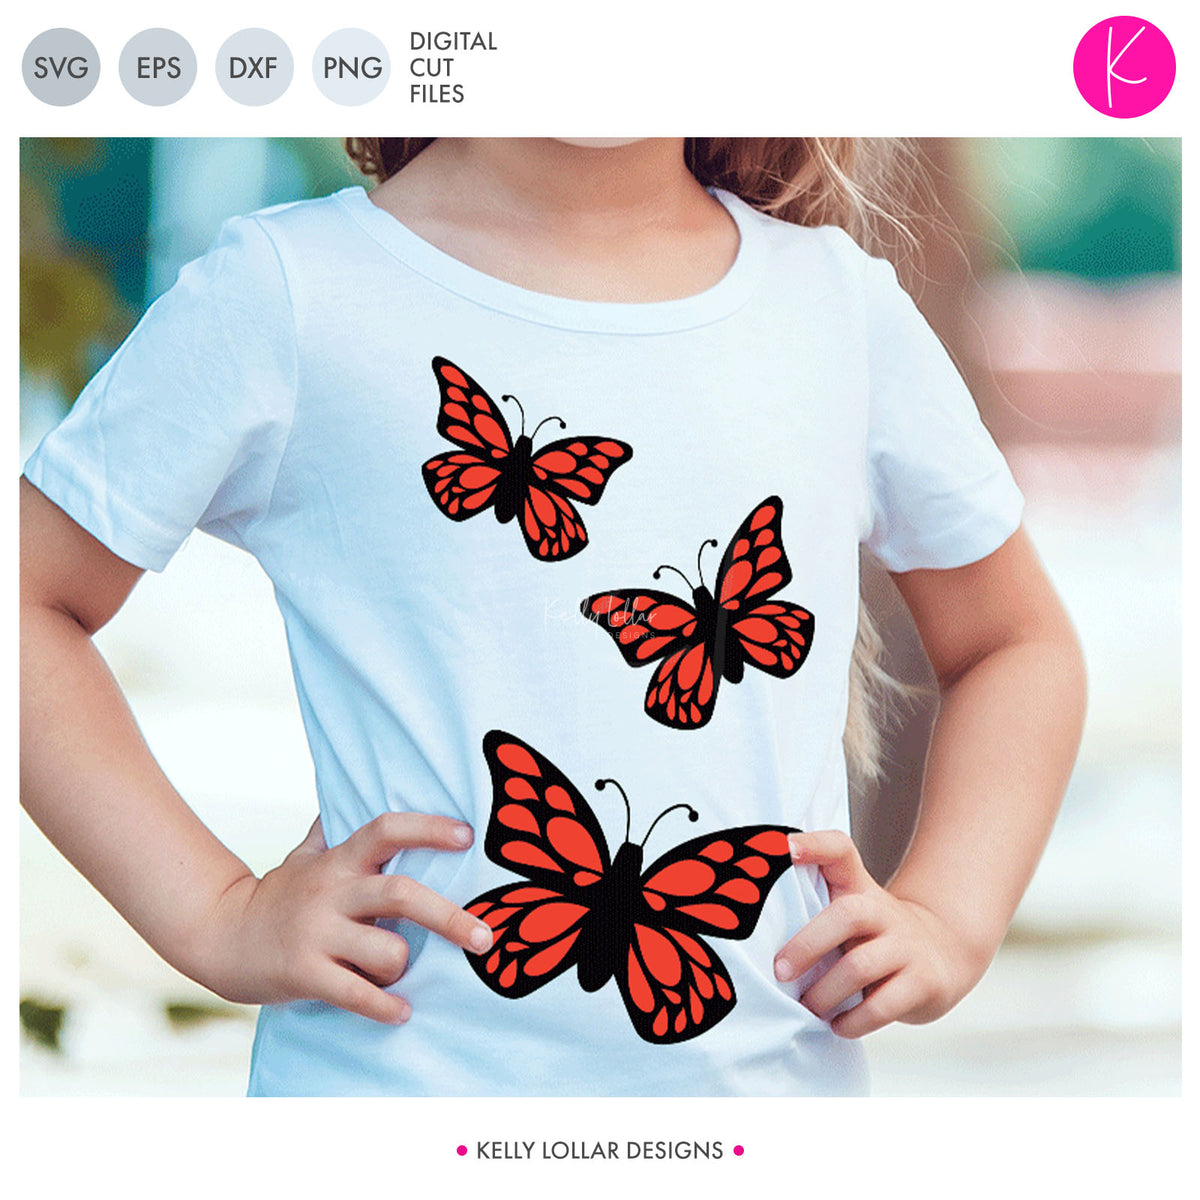 Butterfly Pack | SVG DXF EPS PNG Cut Files